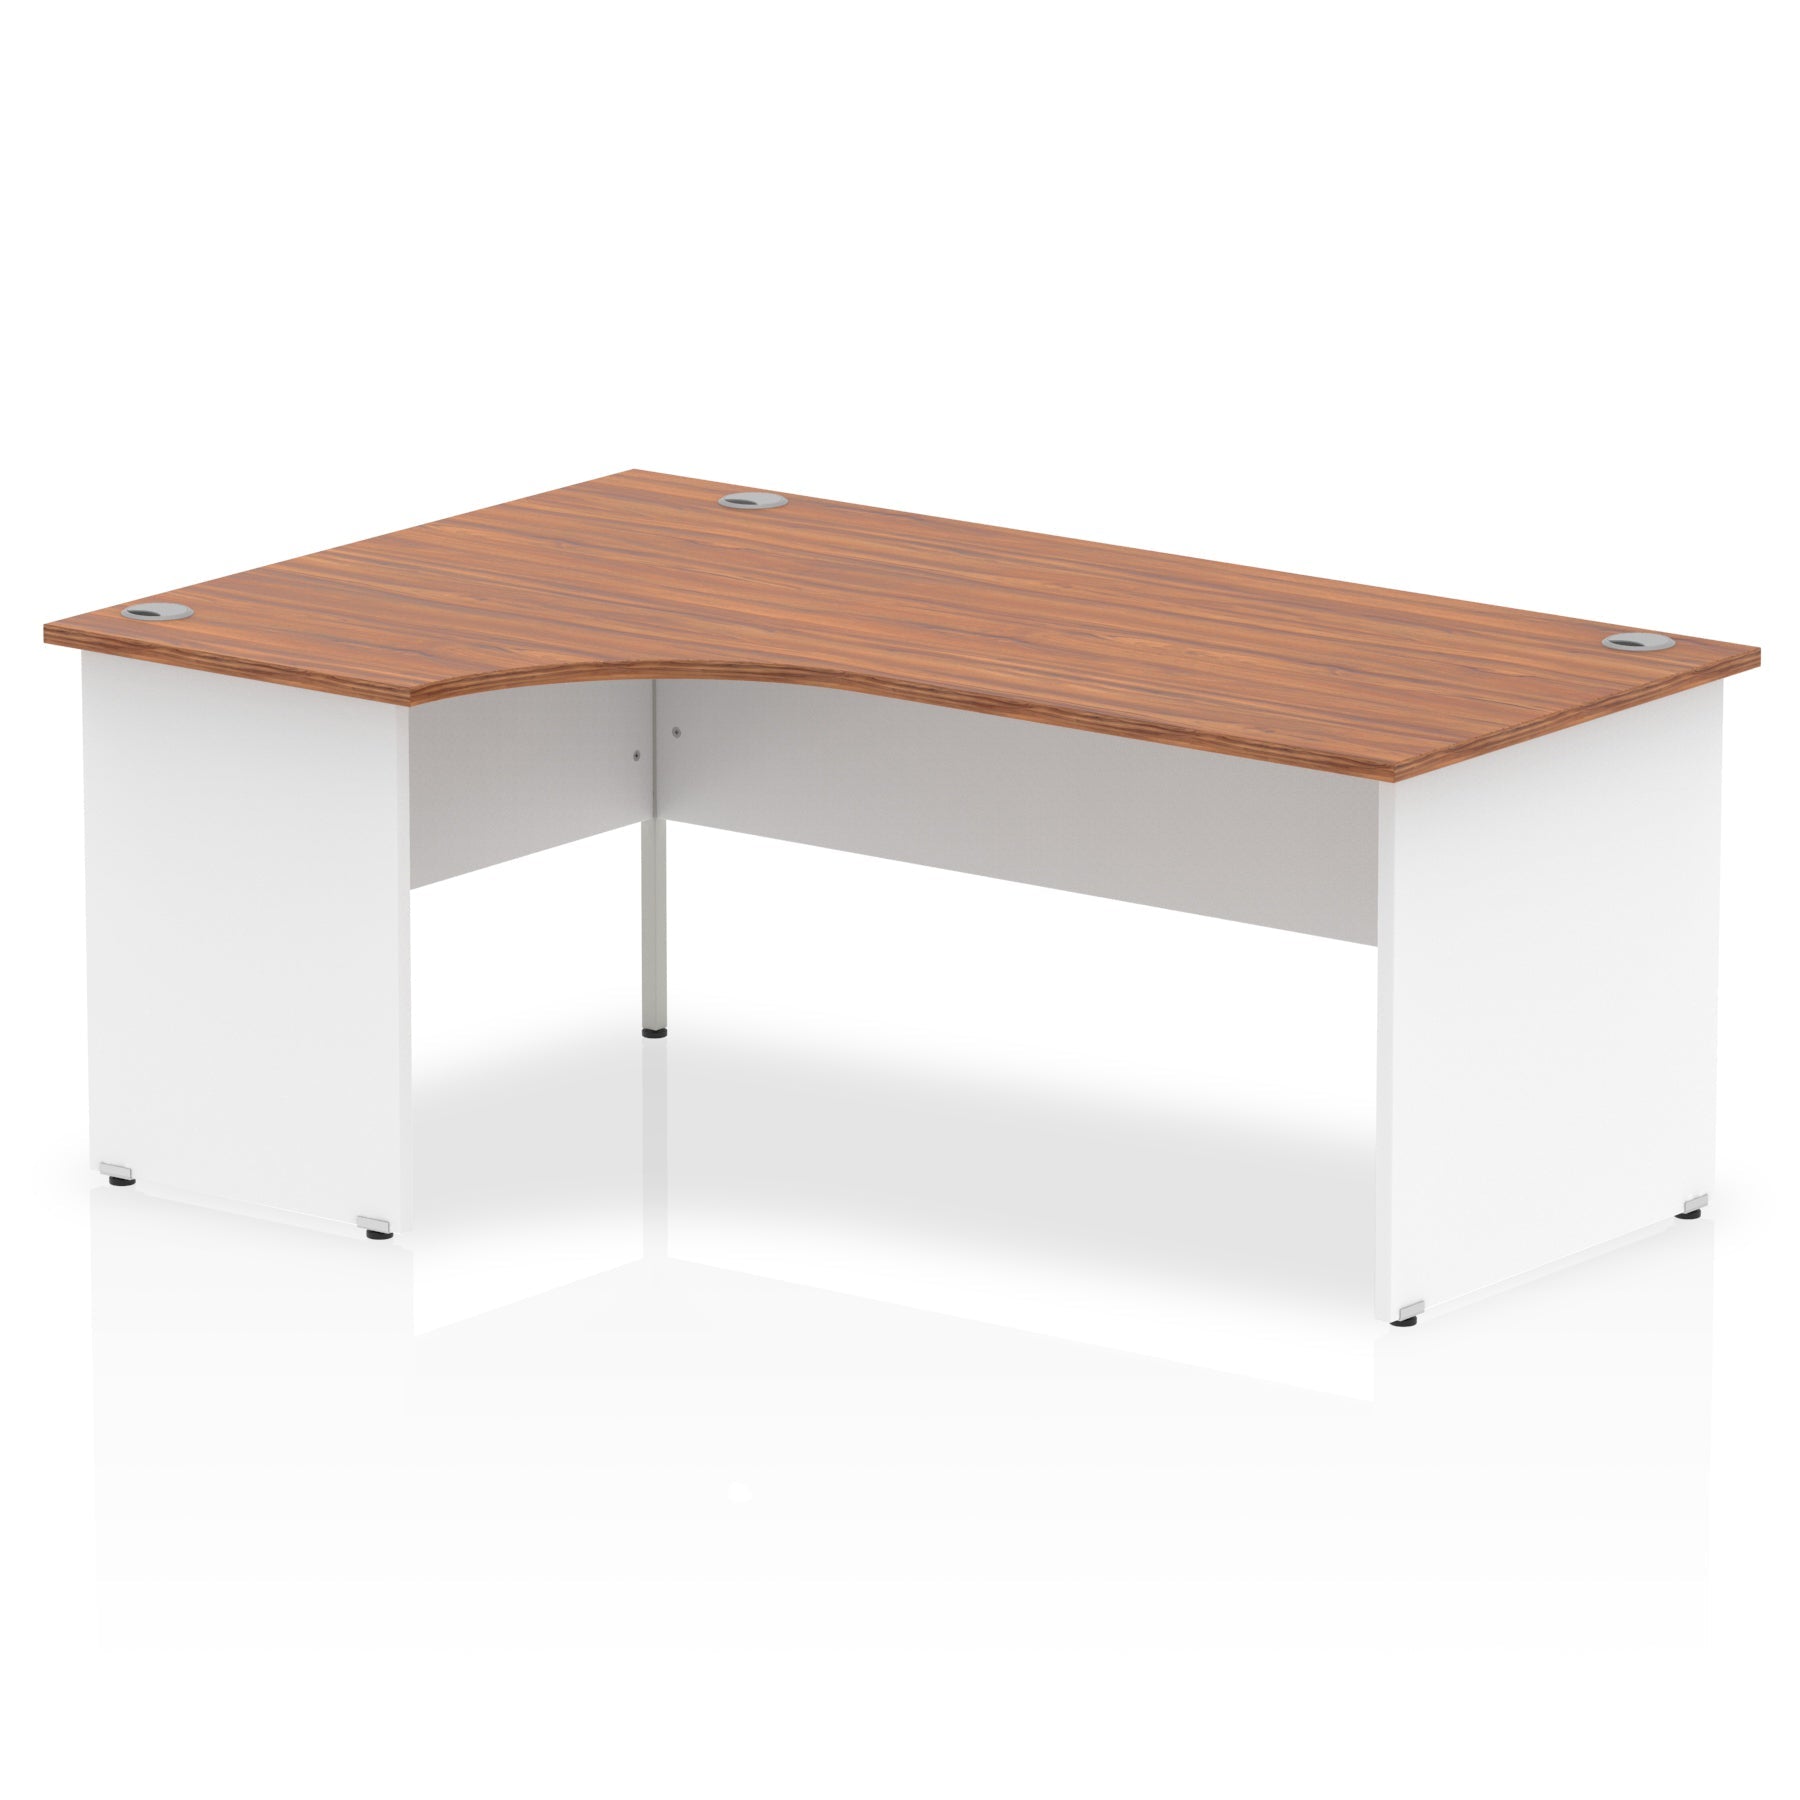 Impulse 1800mm Left Crescent Corner Desk with Panel End Leg - MFC Material, 1800x1200 Top, 5-Year Guarantee, Self-Assembly, White Frame